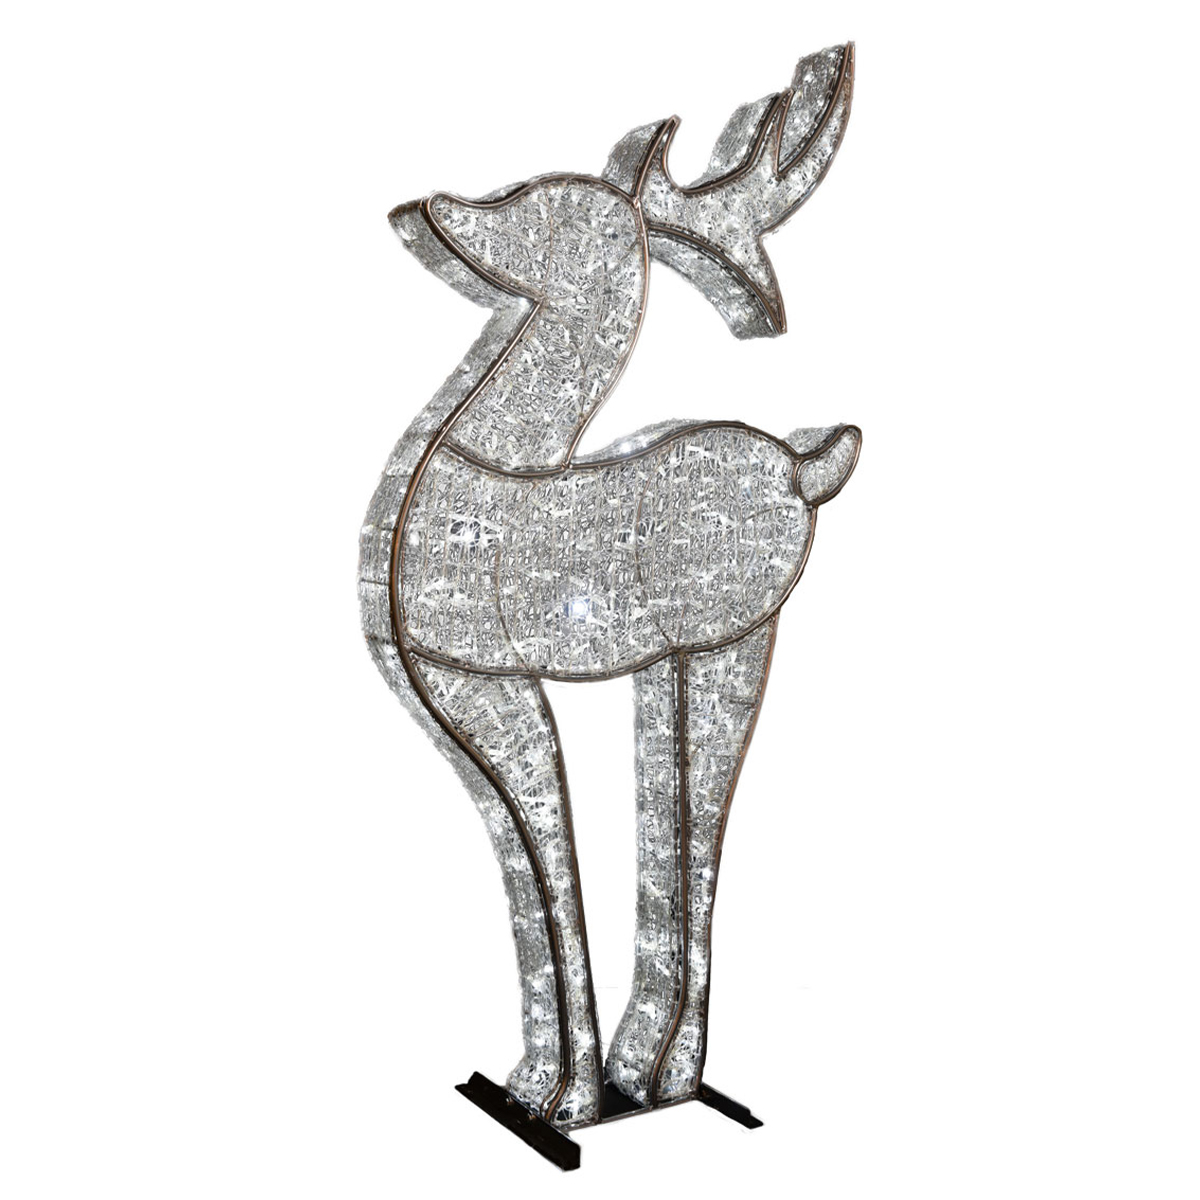 3D Deer - Christmas Display - Cool White LED-lit - Large - Silver - 9ft tall